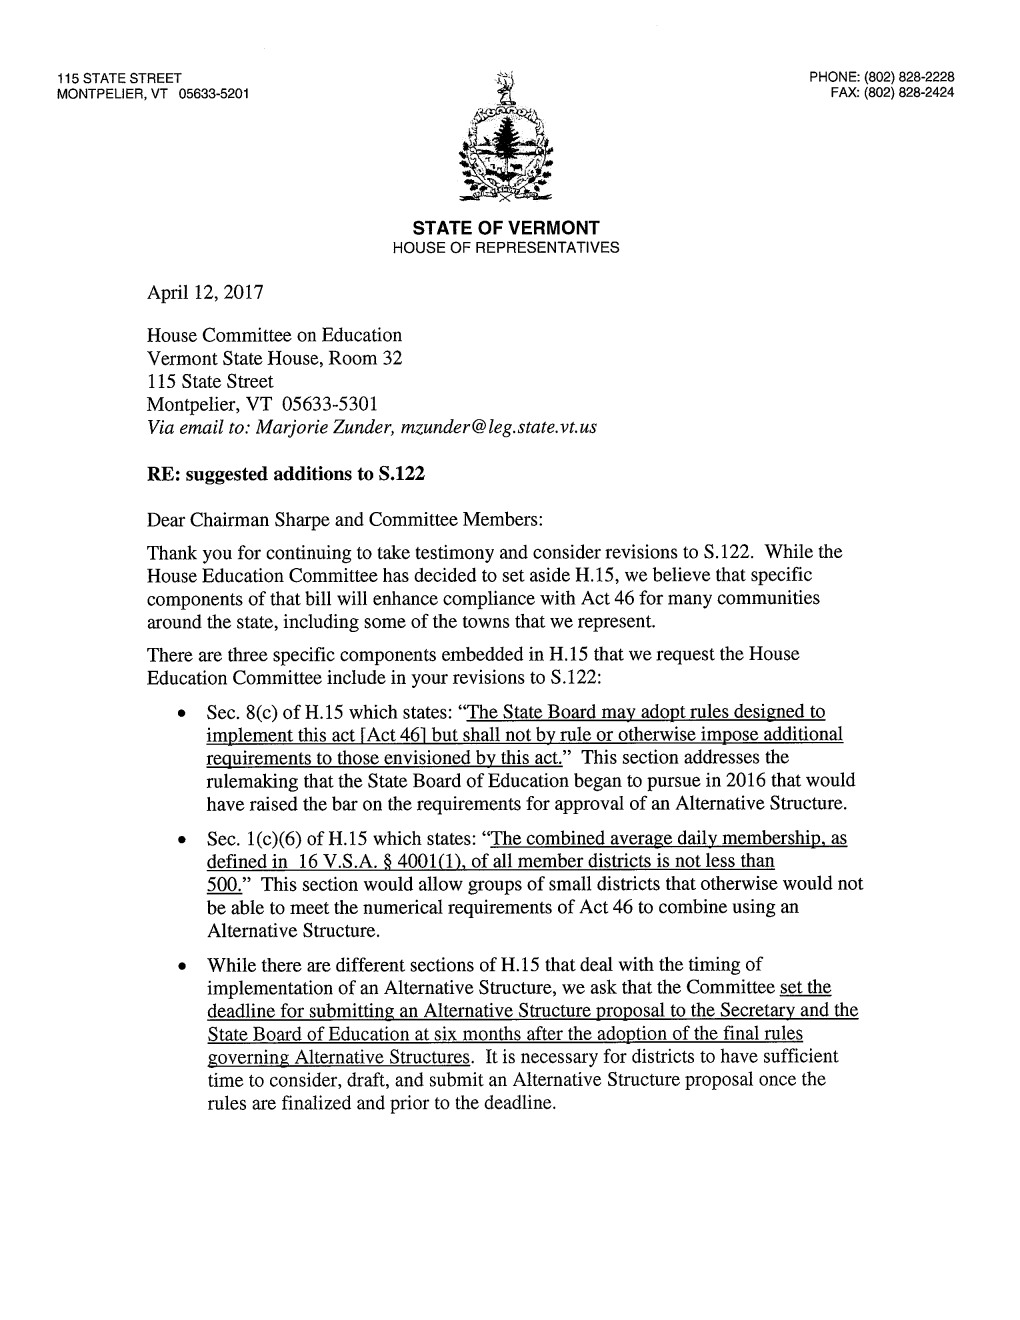 S.122: Letter from Rep. Briglin and Others